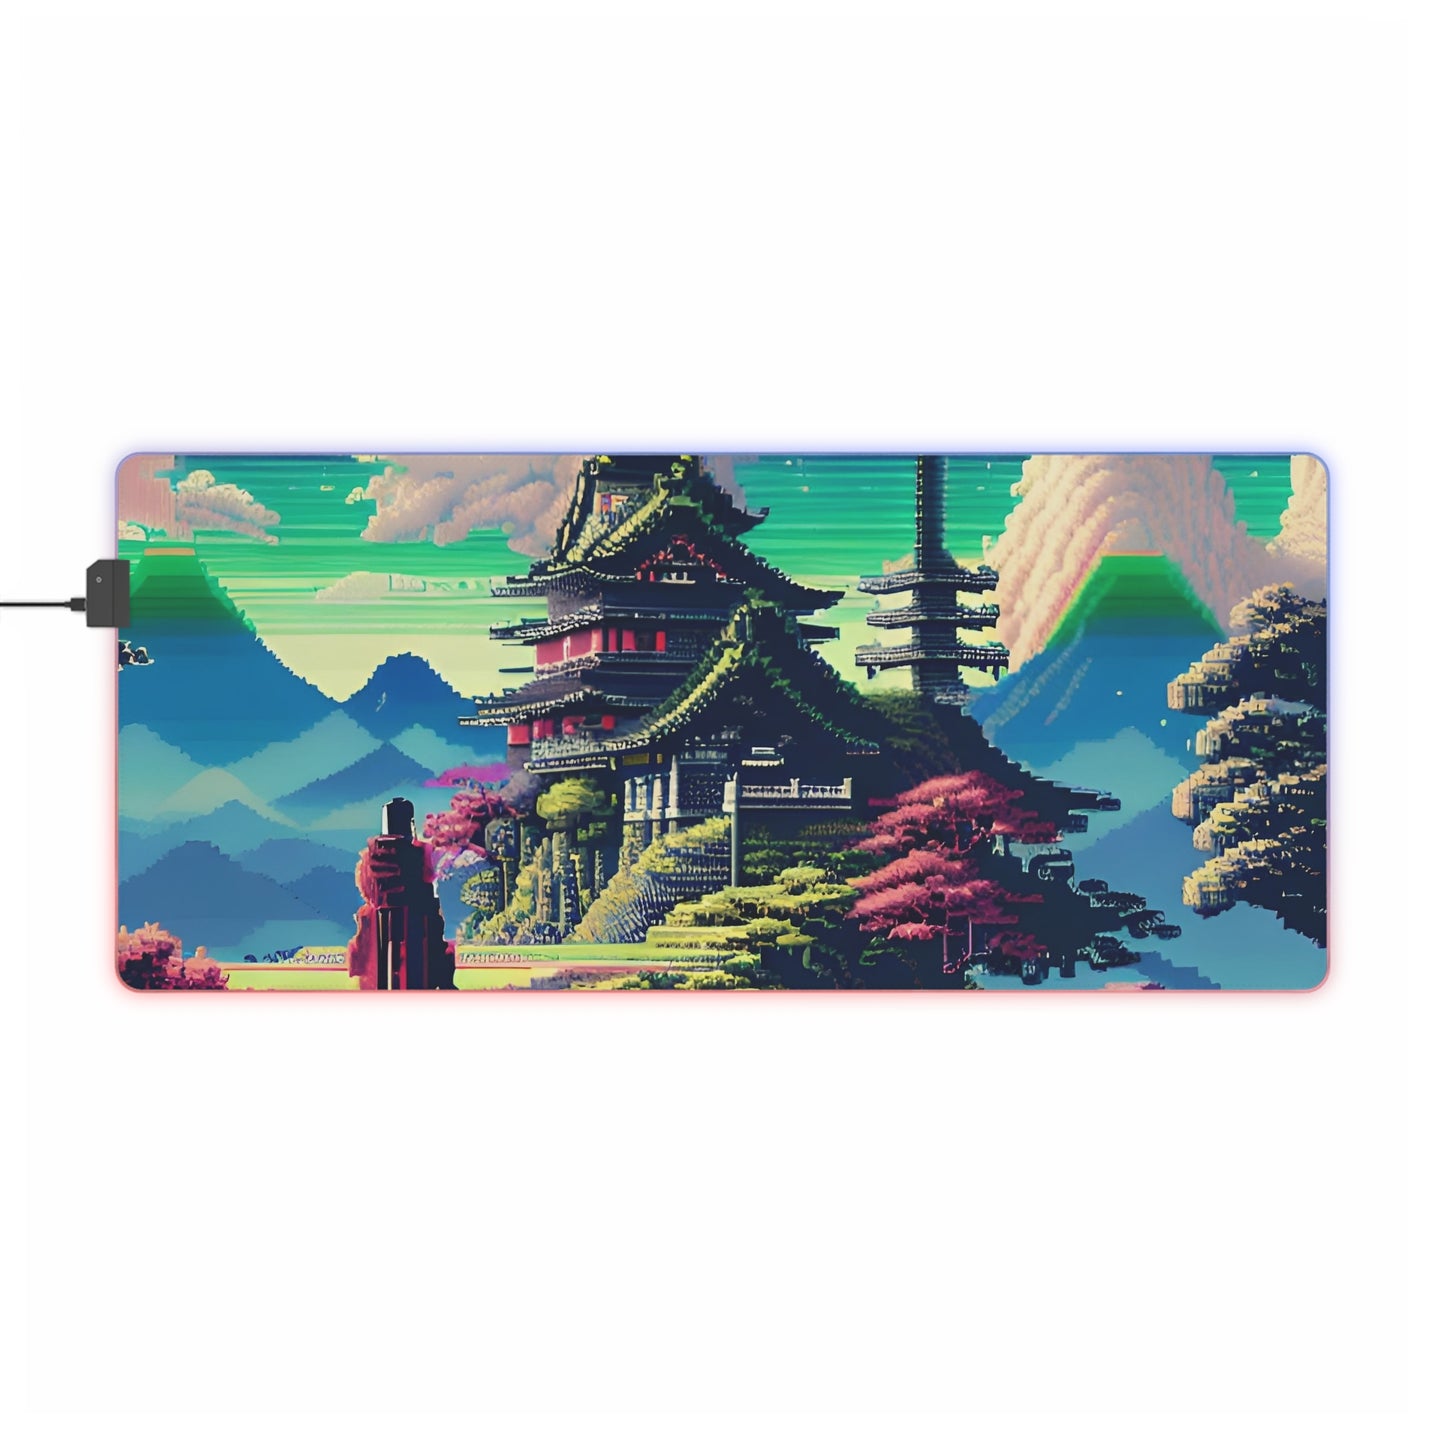 Pixel Mountain Tower LED Gaming Mouse Pad